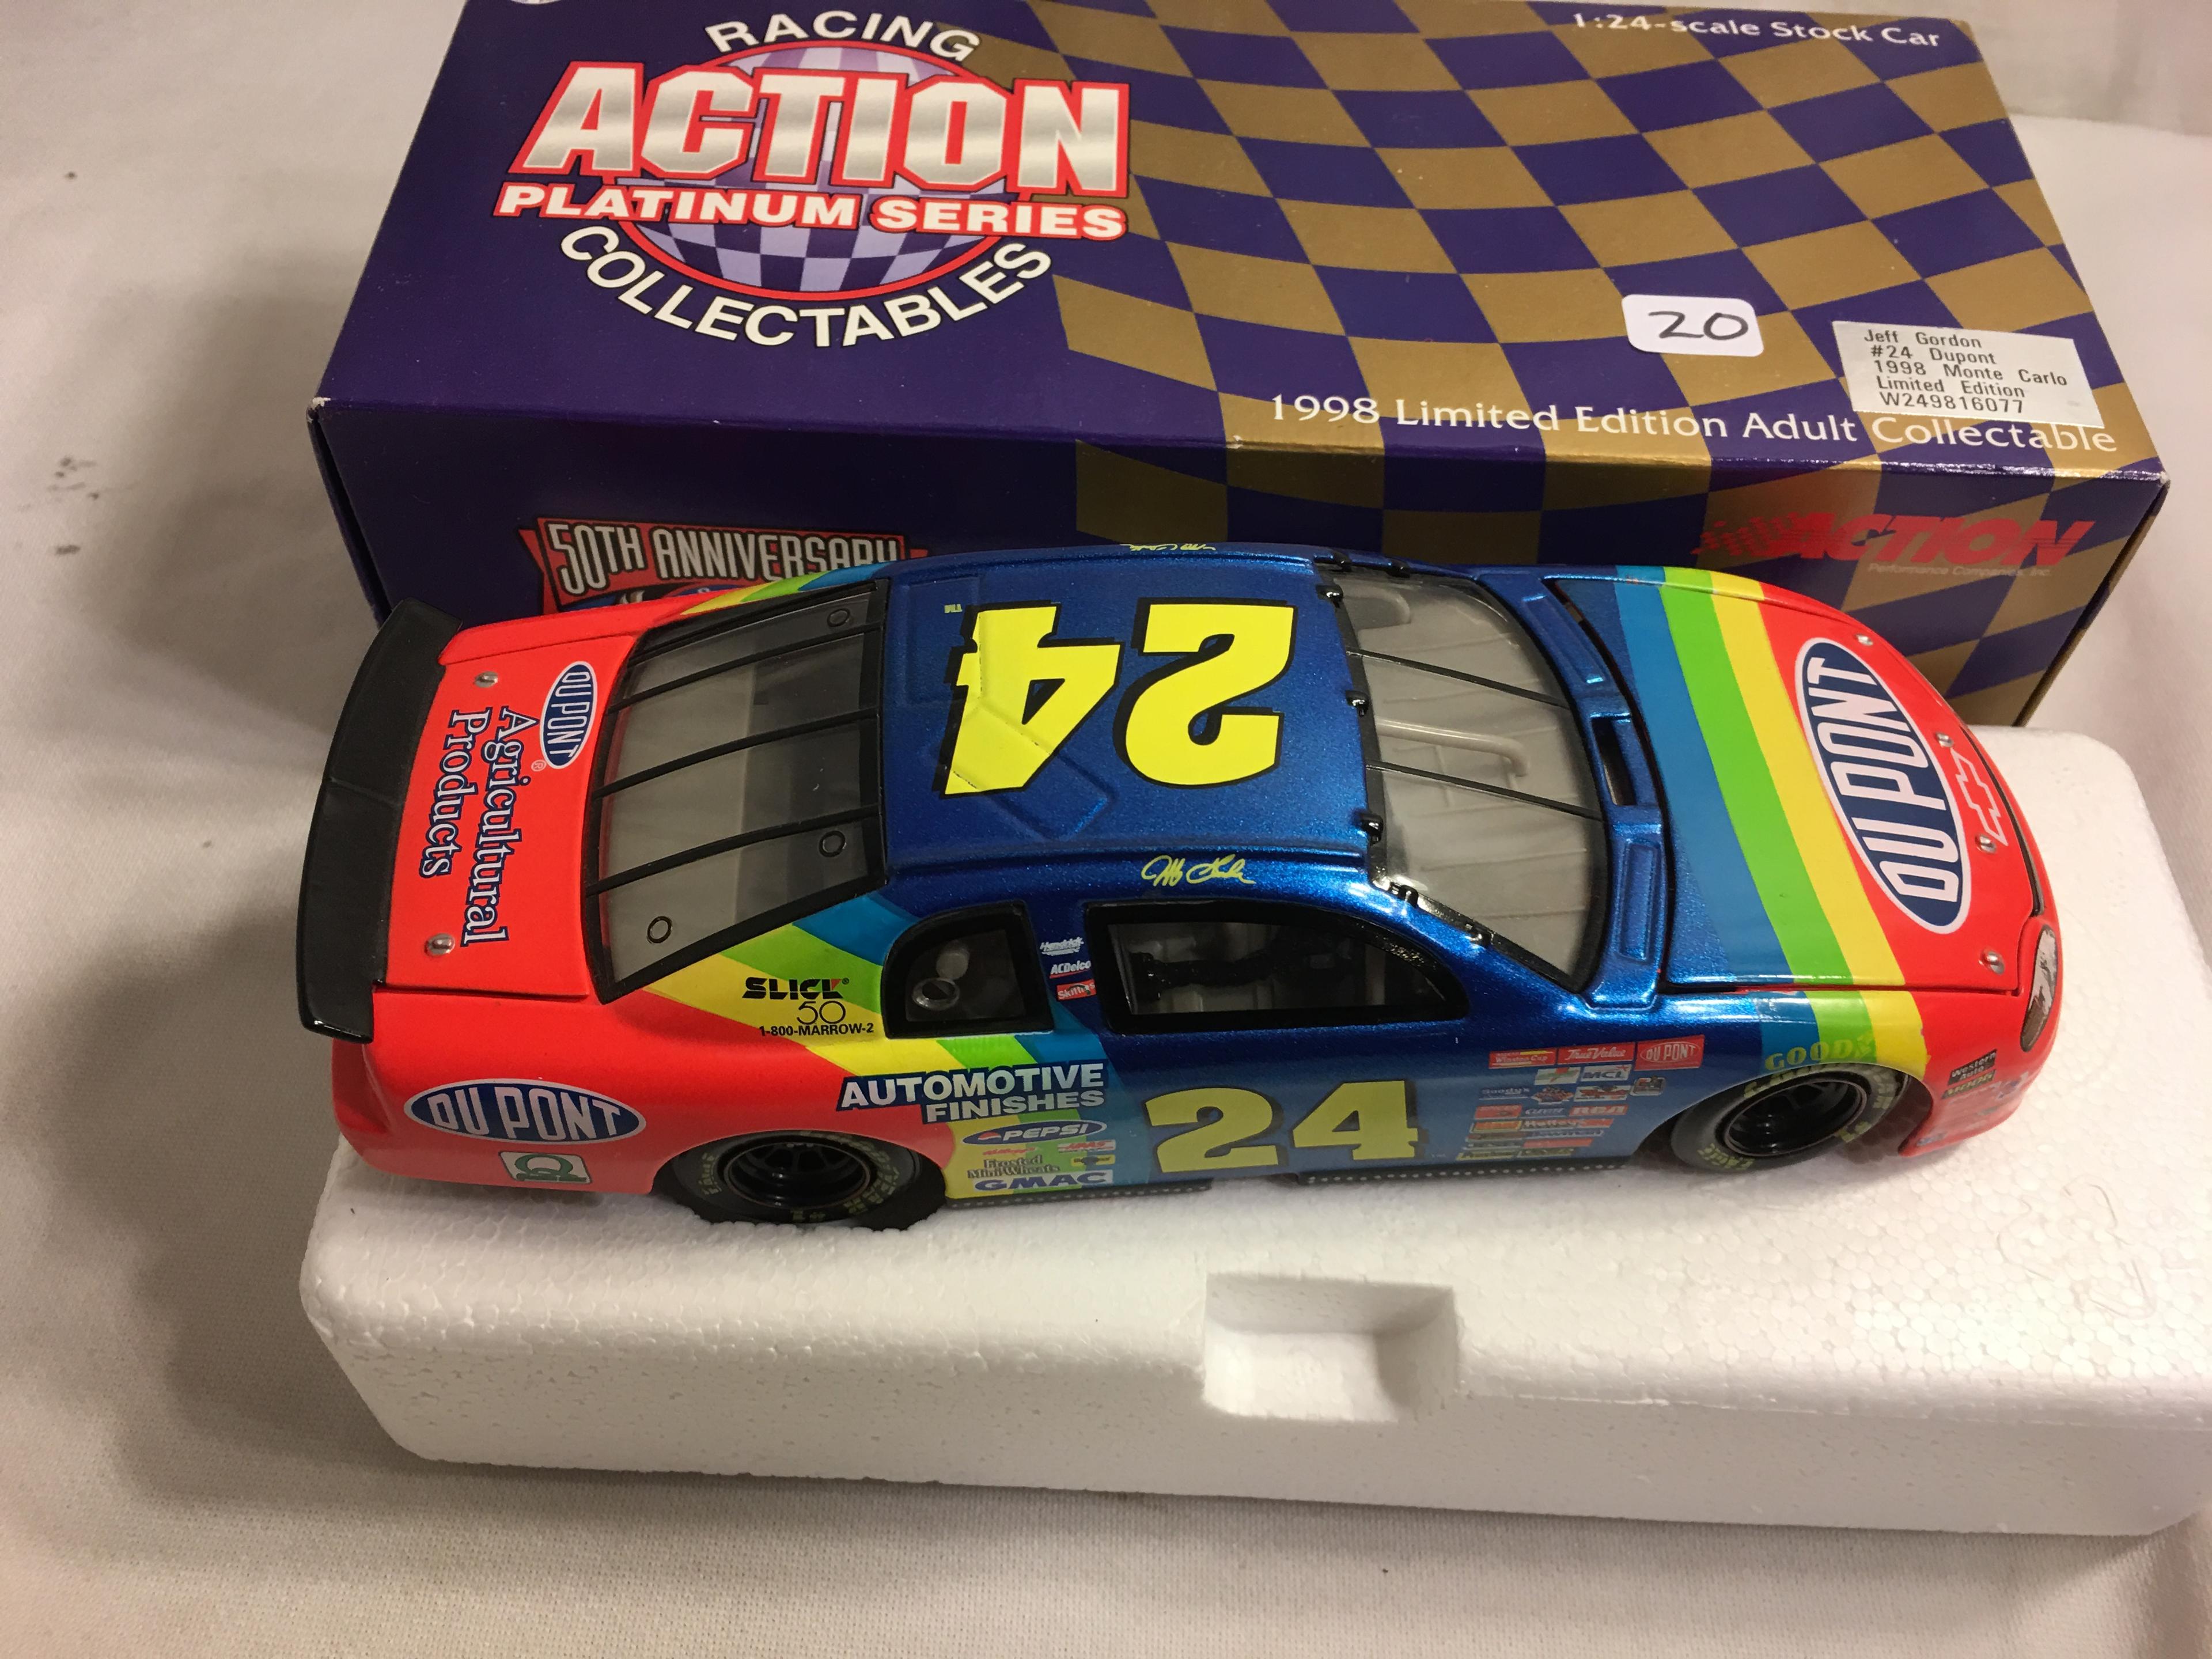 Action Racing 1998 Monte Carlo Jeff Gordon #24 DuPOnt Limited Edt. W249816077 Scale 1:24 Stock Car